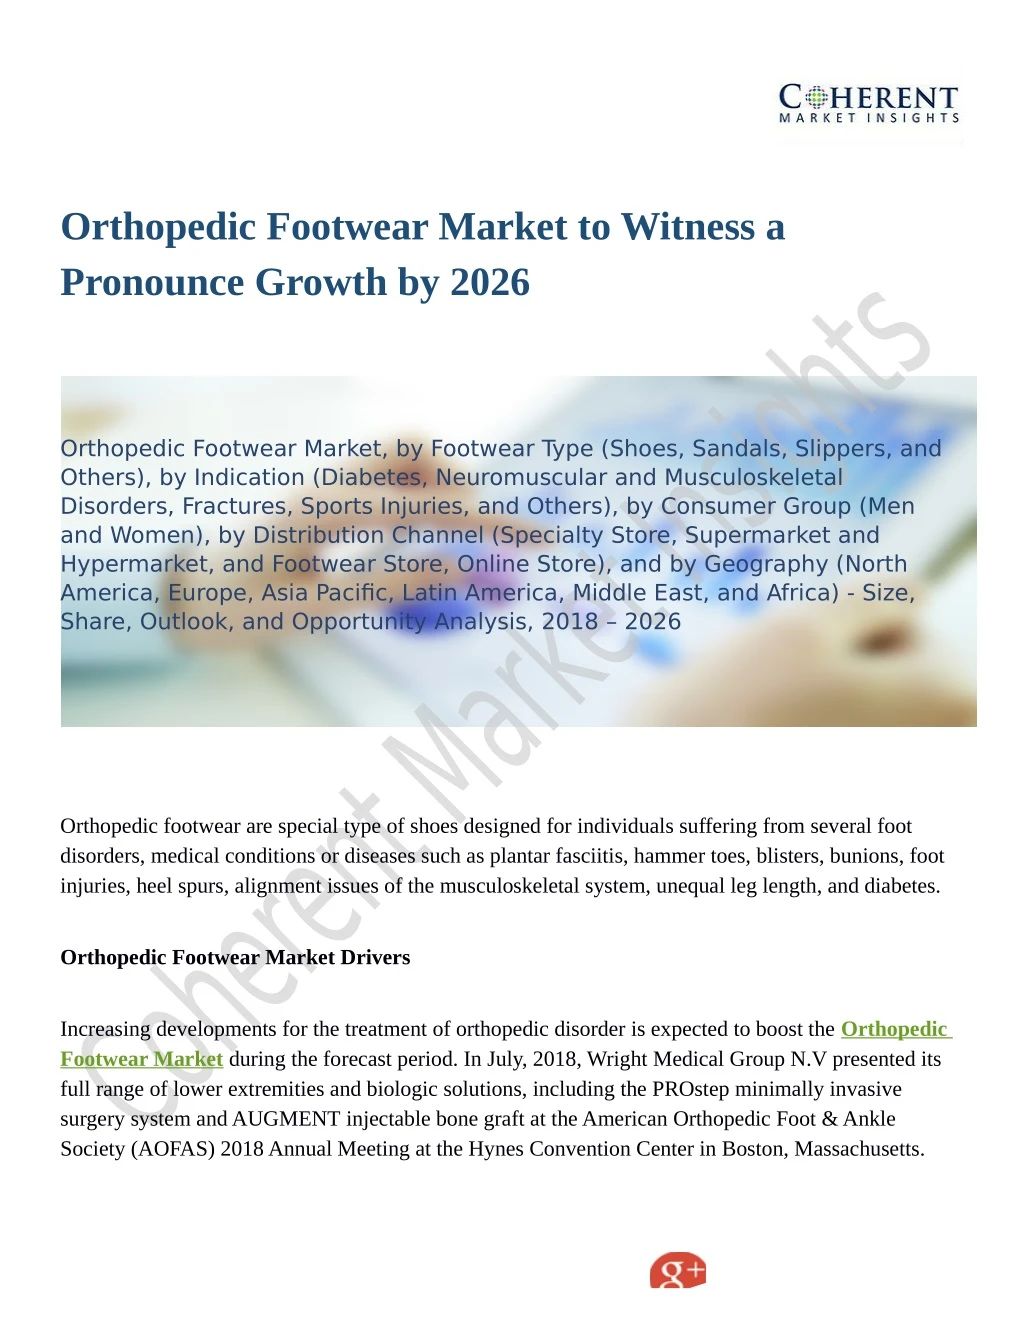 orthopedic footwear market to witness a pronounce